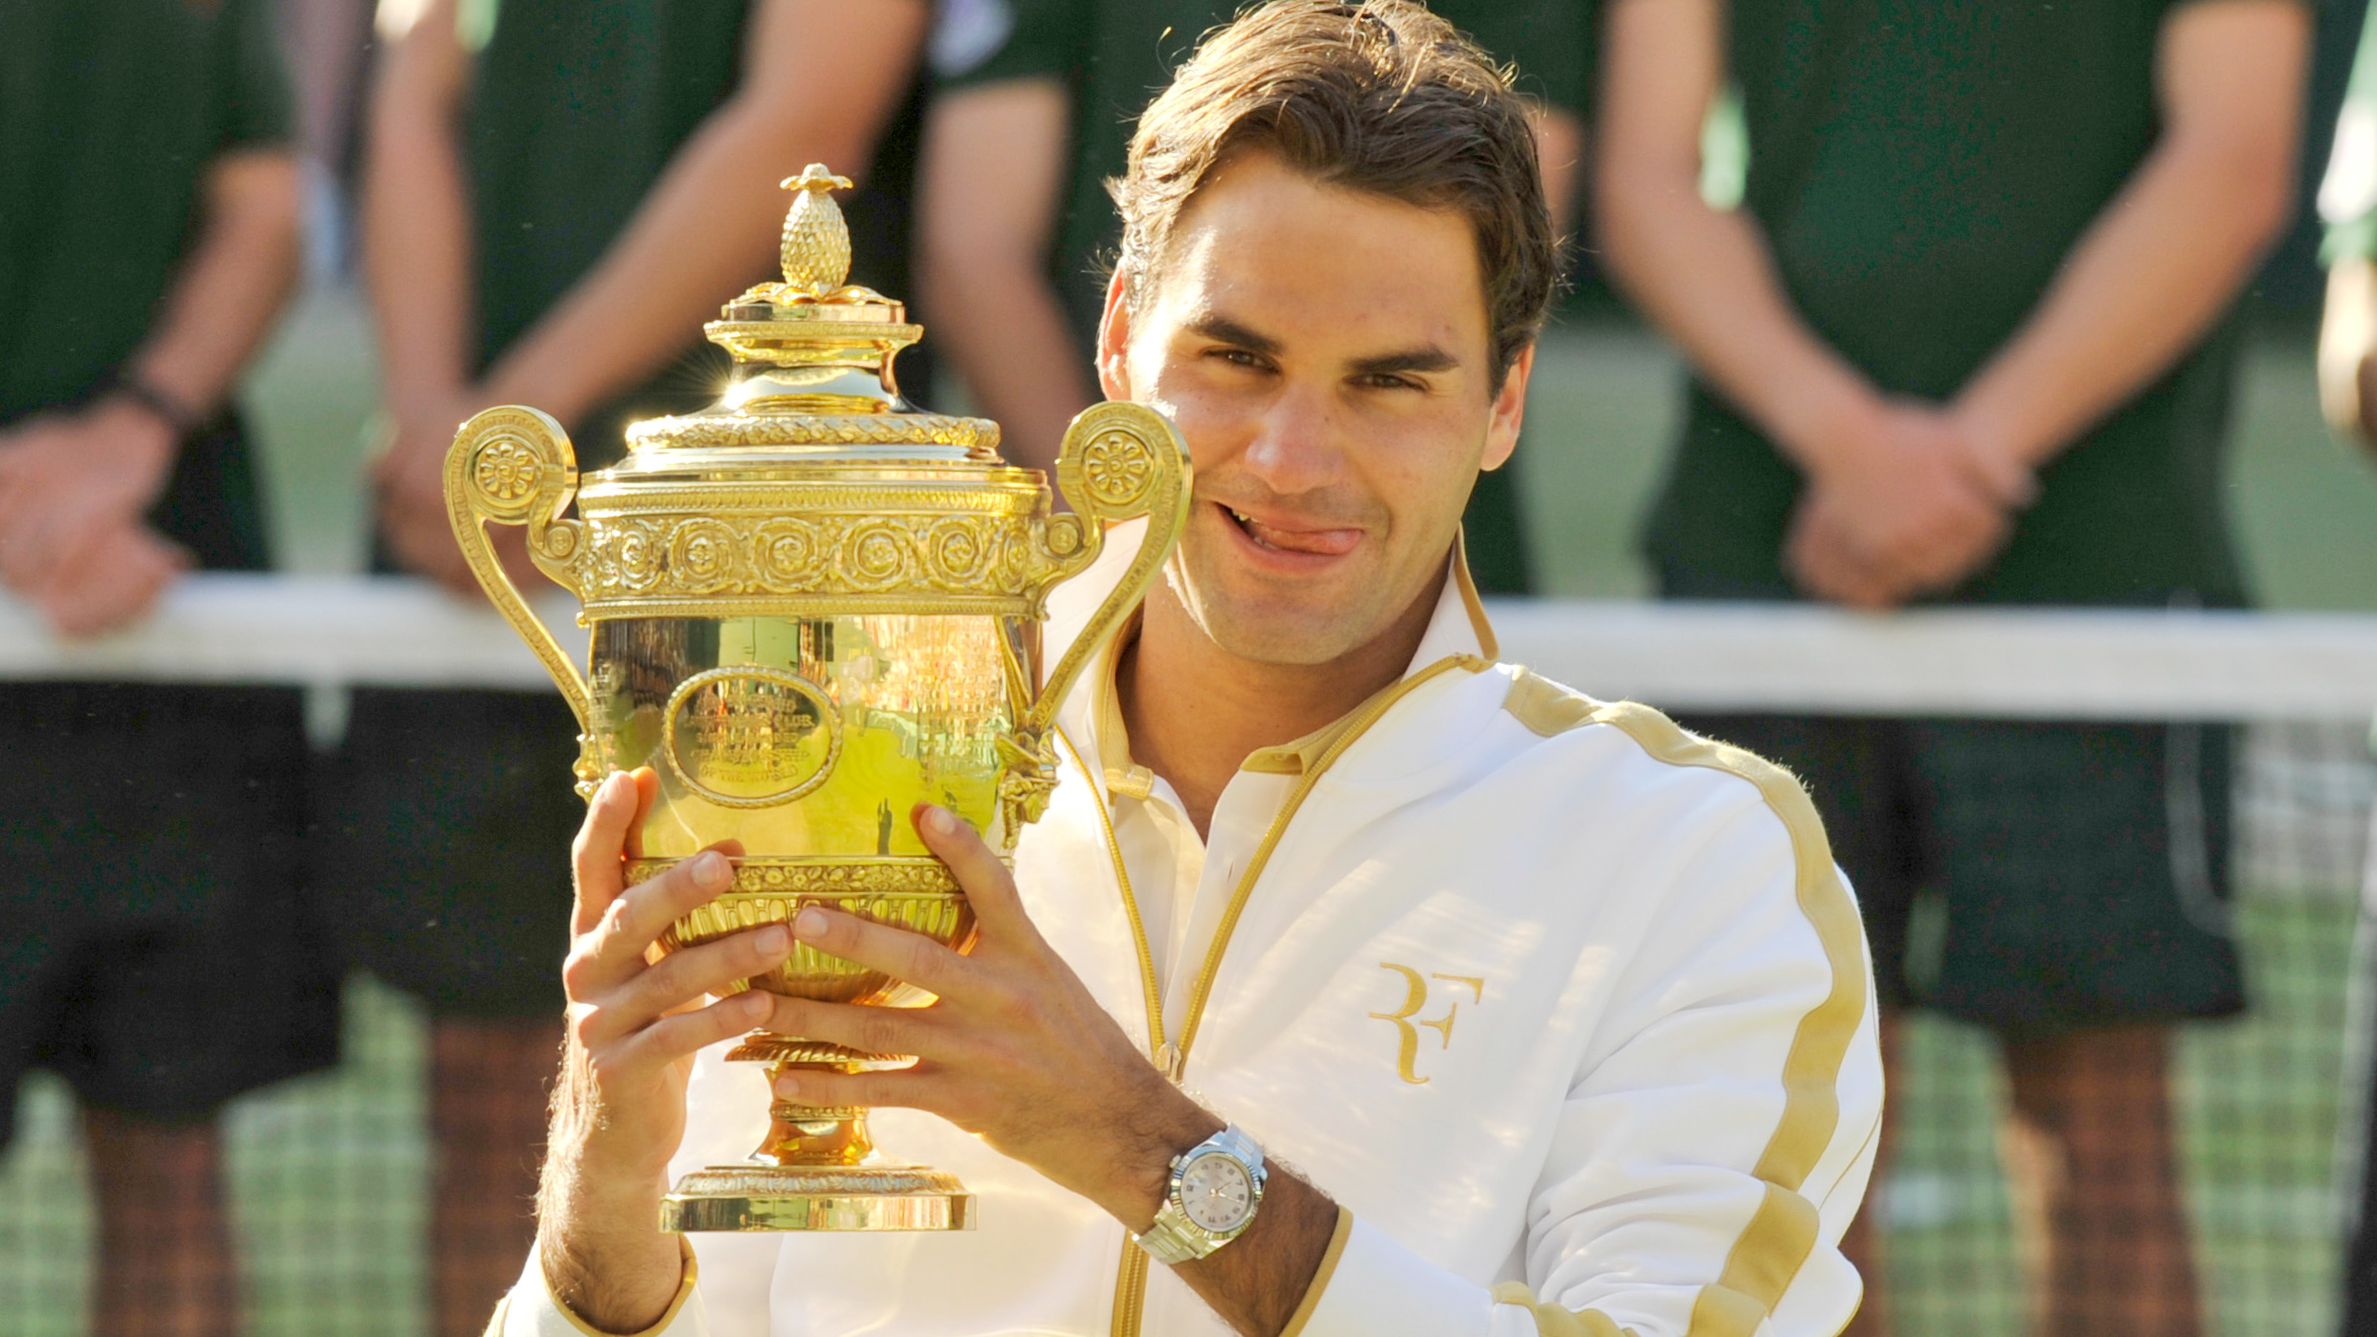 Rodger Federer with the trophy after defeating Andy Roddick Wimbledon Tennis Championships Mens Final 5th July 2009. (Photo by David Ashdown/Getty Images)